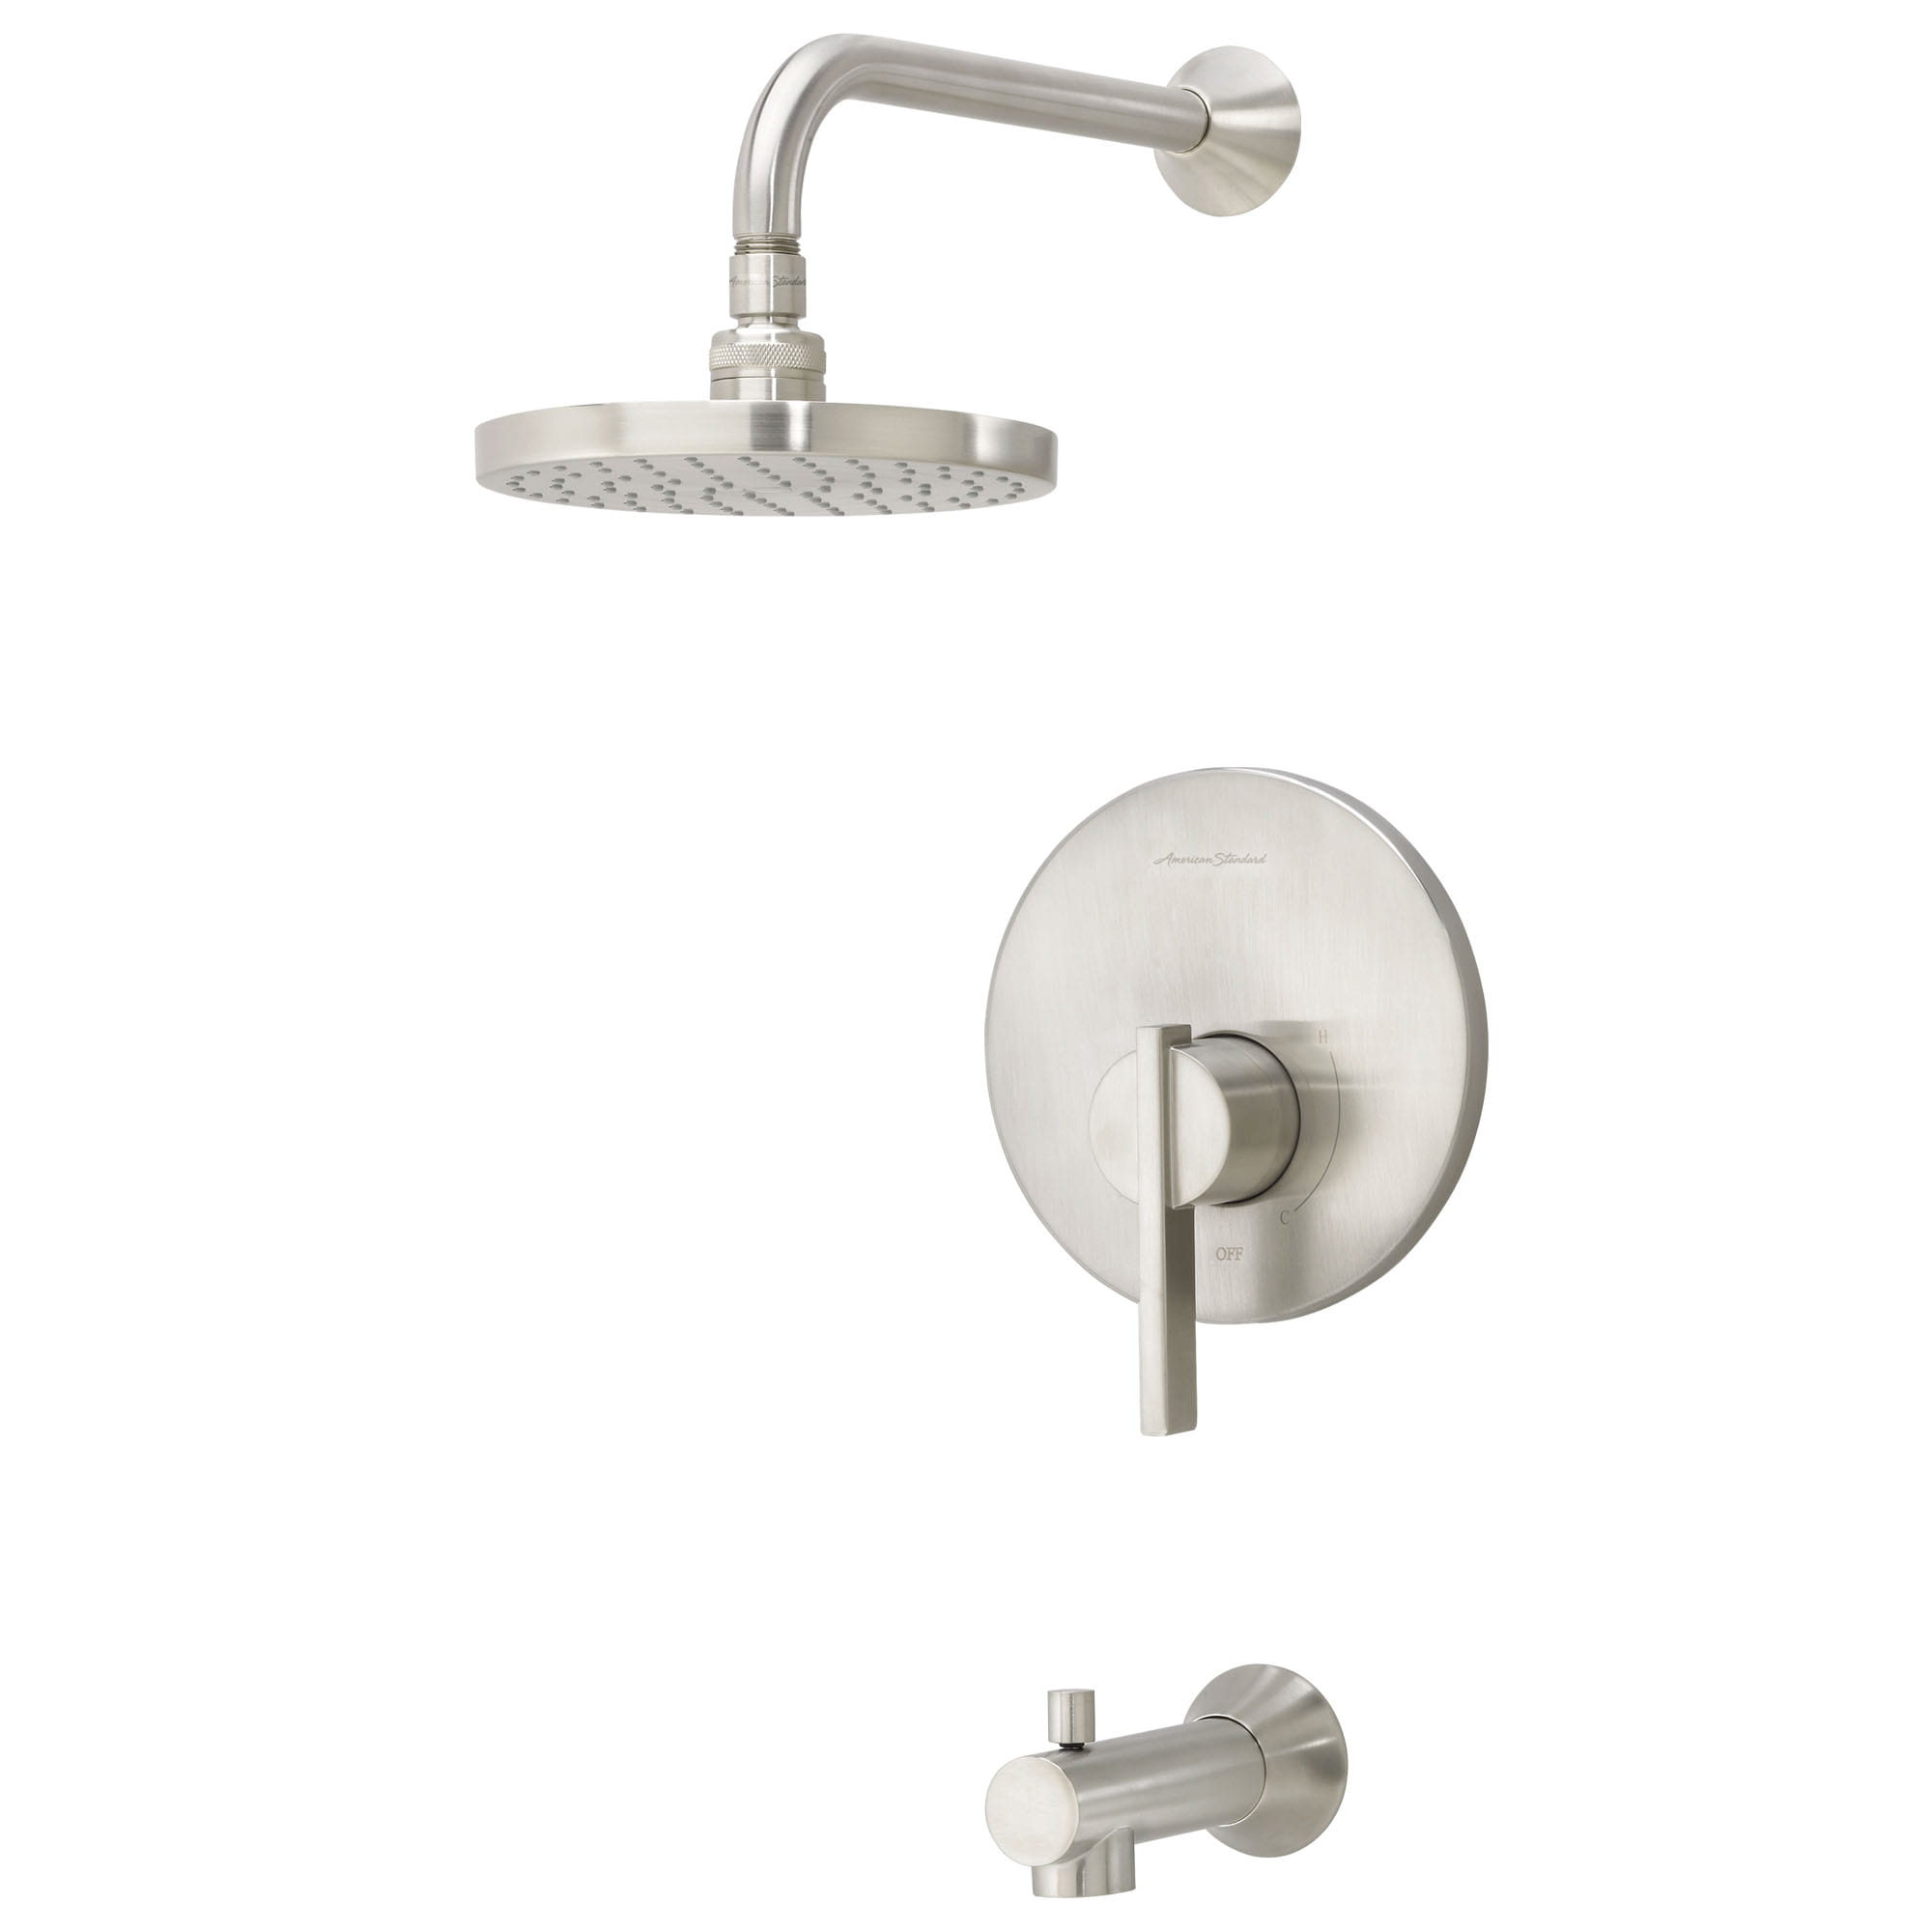 Berwick 25 gpm 95 L min Tub and Shower Trim Kit With Rain Showerhead Double Ceramic Pressure Balance Cartridge and Lever Handle   BRUSHED NICKEL